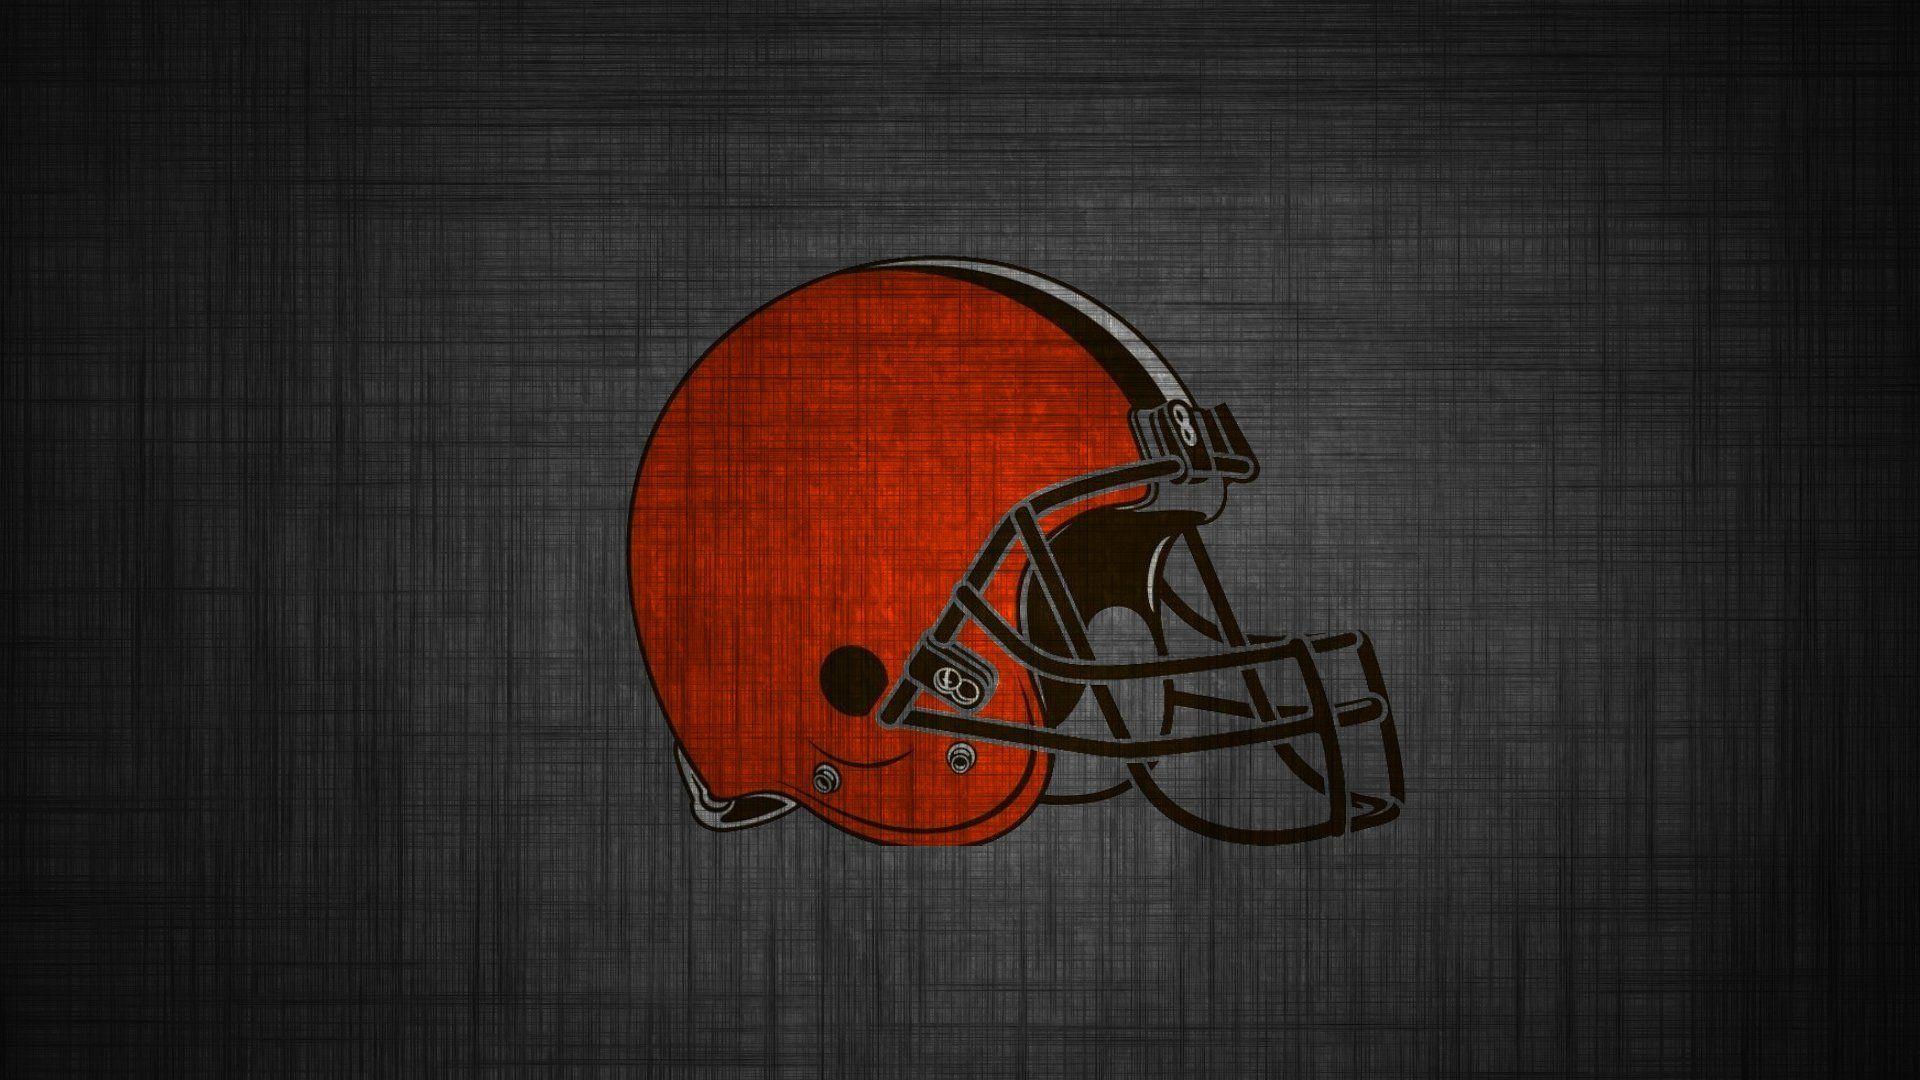 Gallery For gt Browns Logo Wallpaper 1920x1080